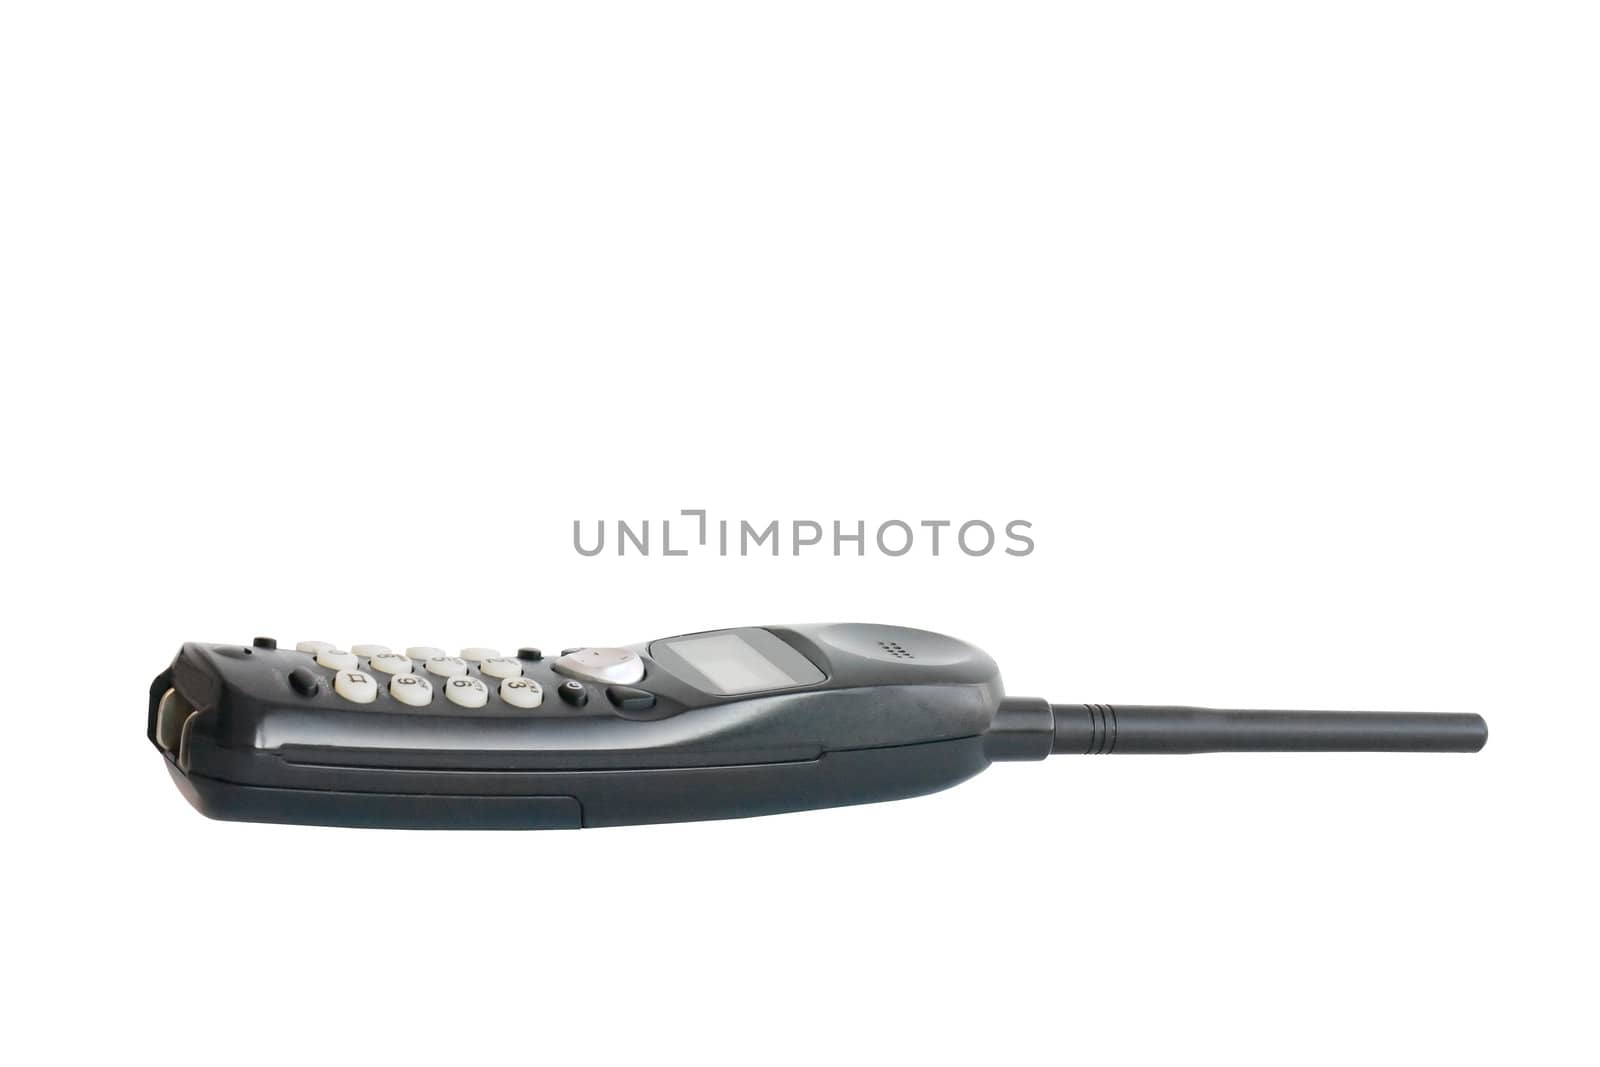 The black telephone receiver with antenna, isolated on white background.